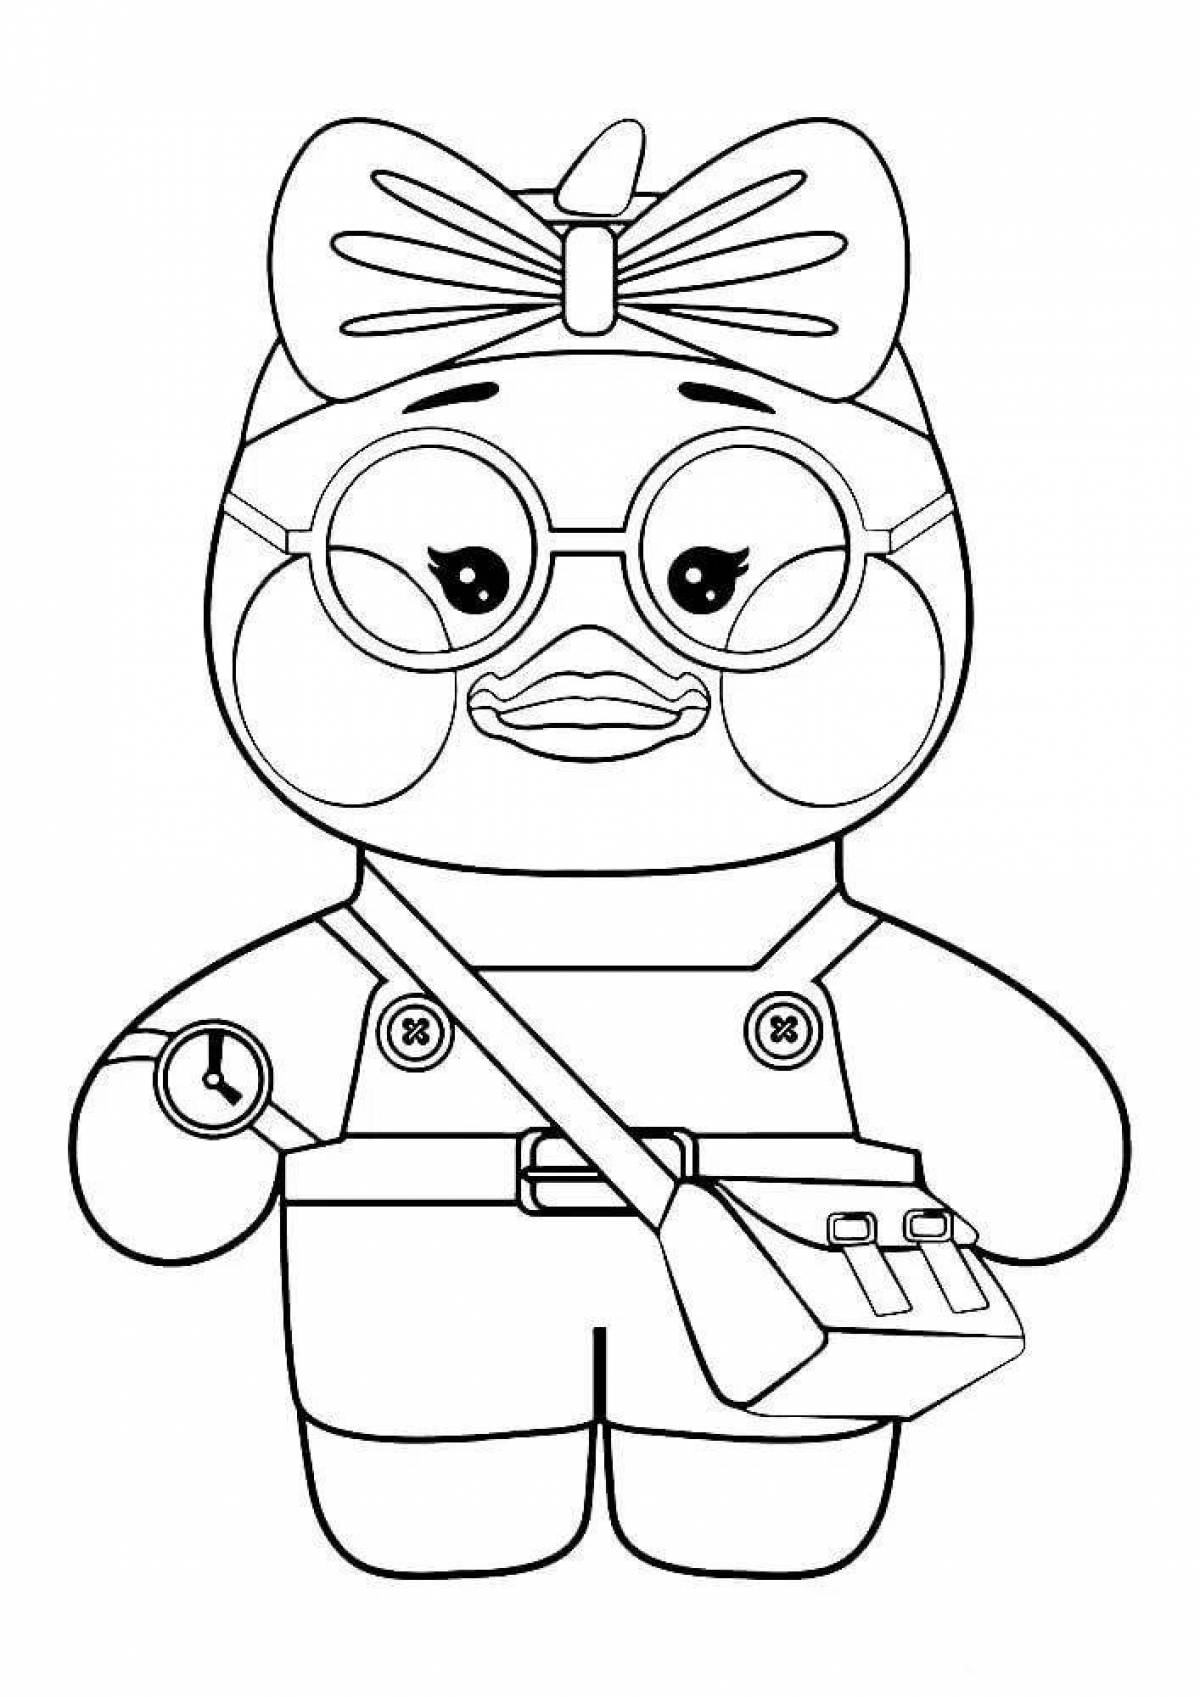 Lalafanfan duck coloring page for girls